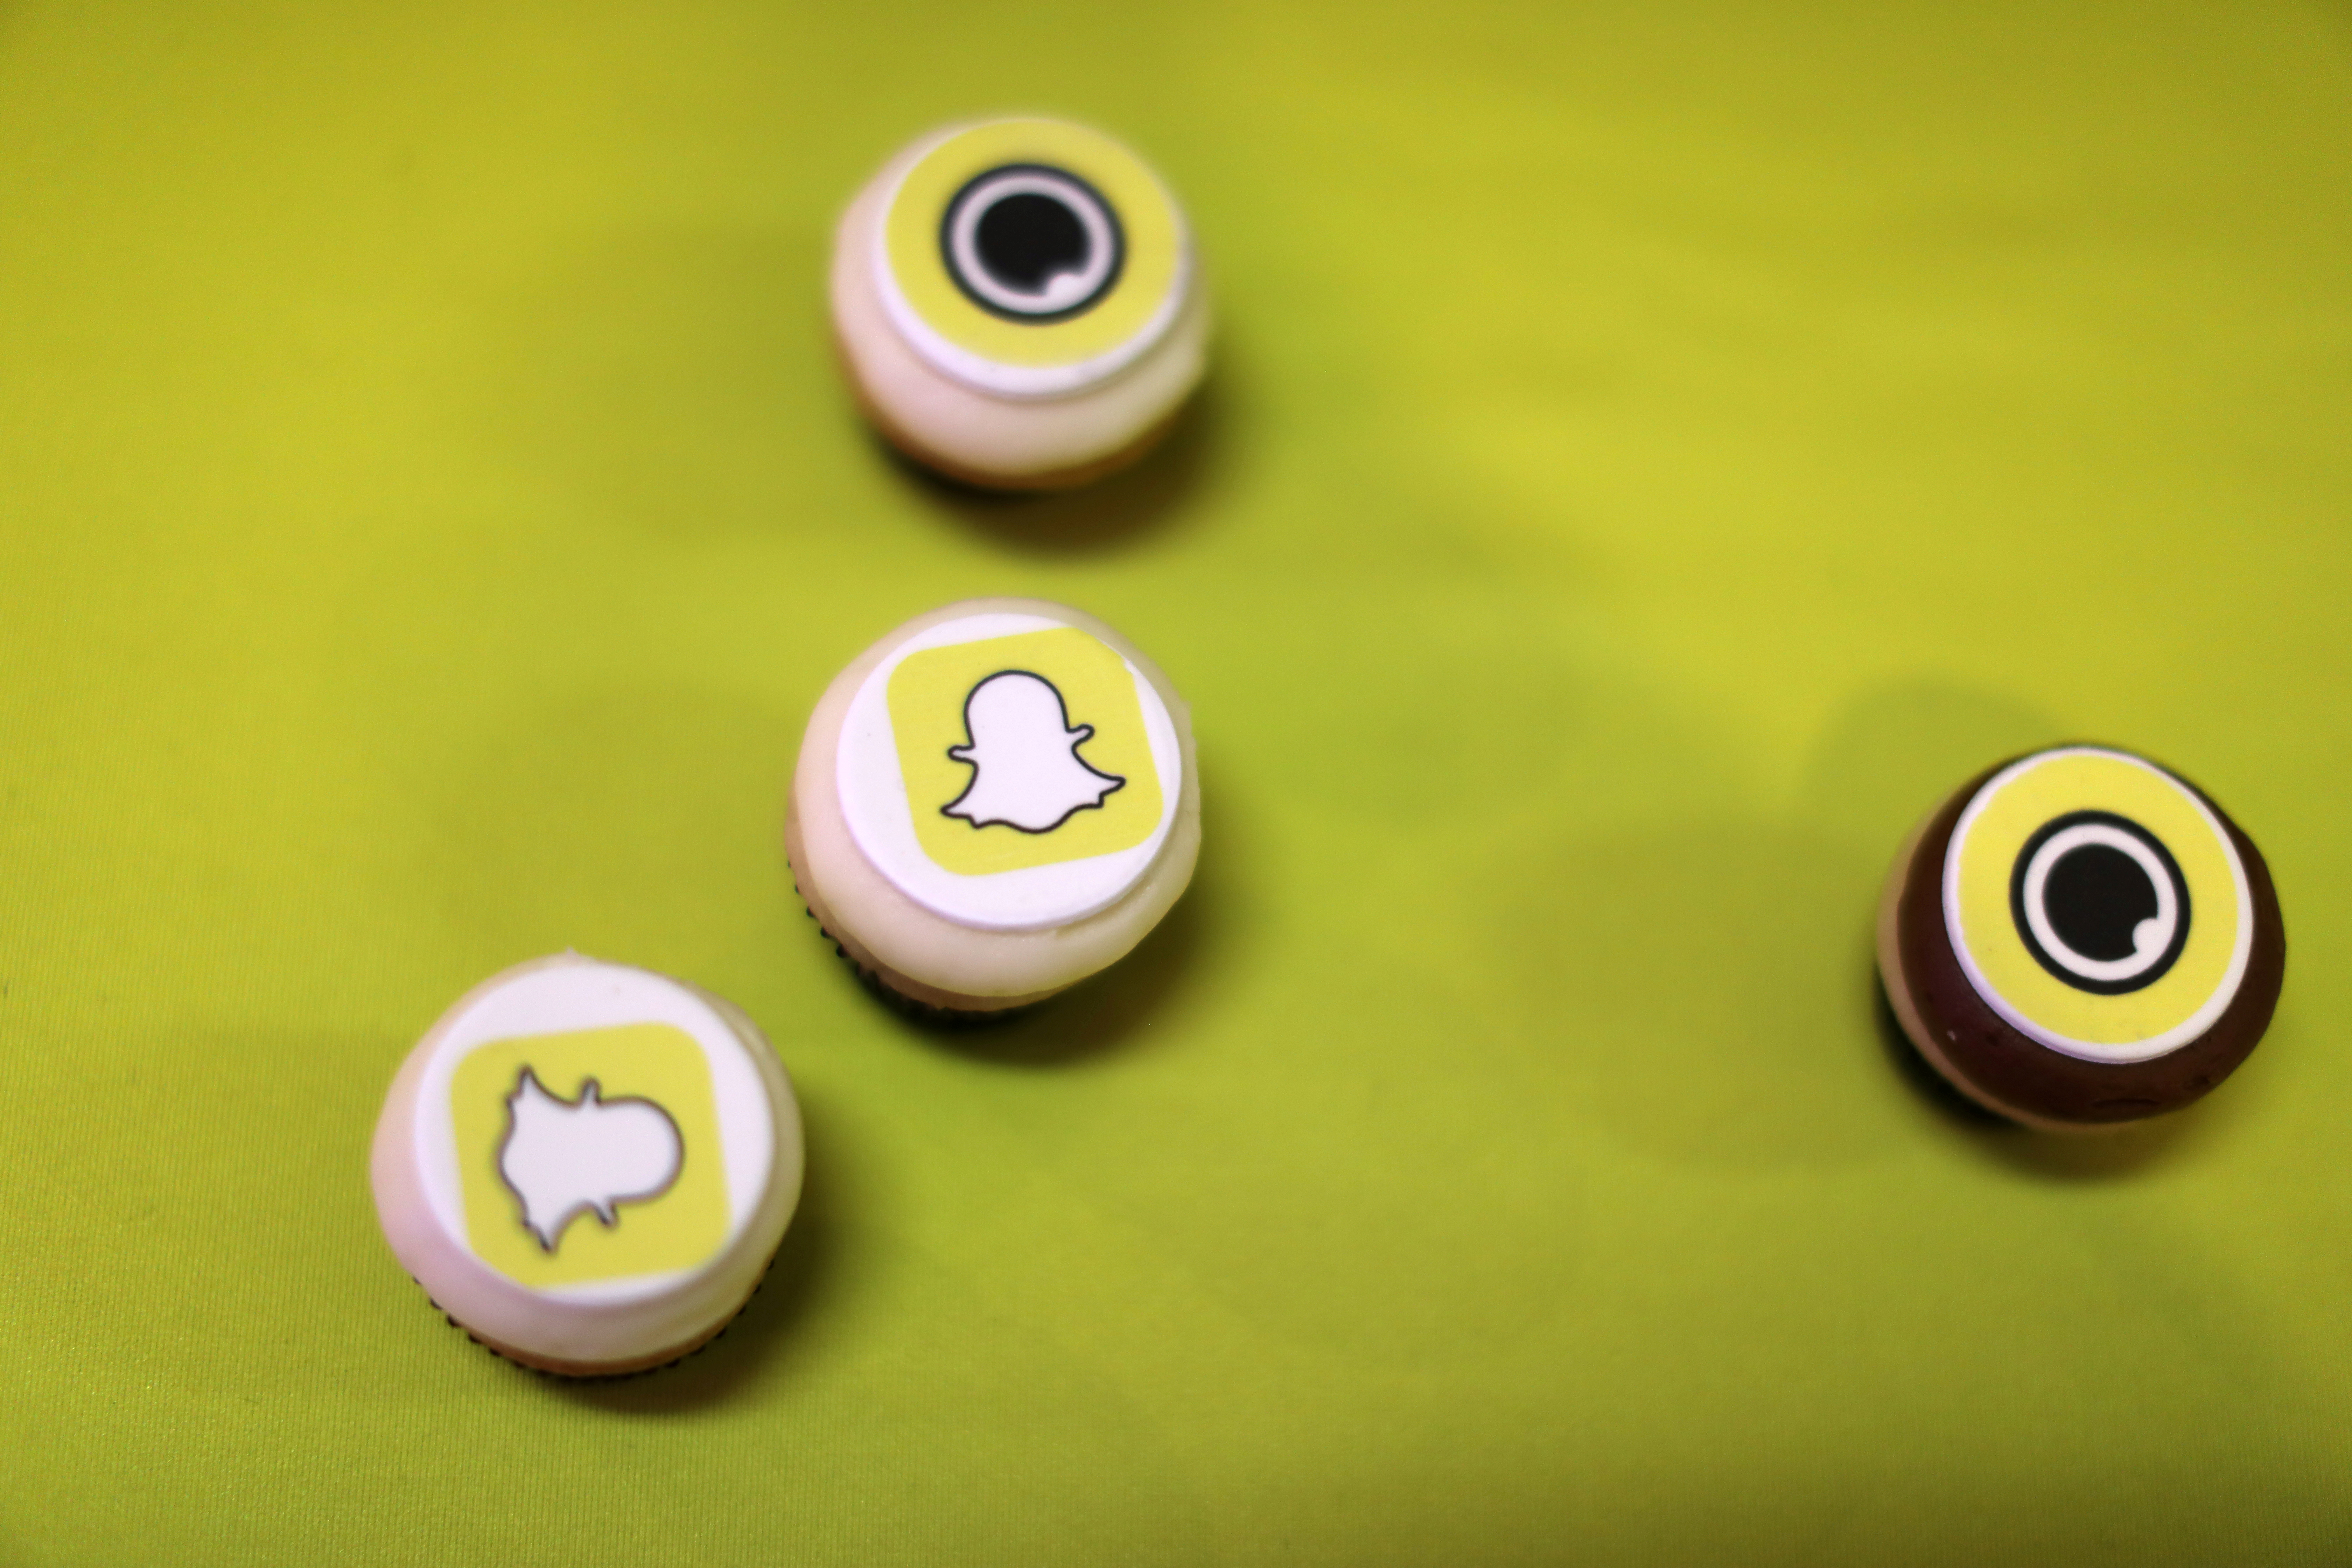 The logo of messaging app Snapchat is seen at a booth at TechFair LA, a technology job fair, in Los Angeles